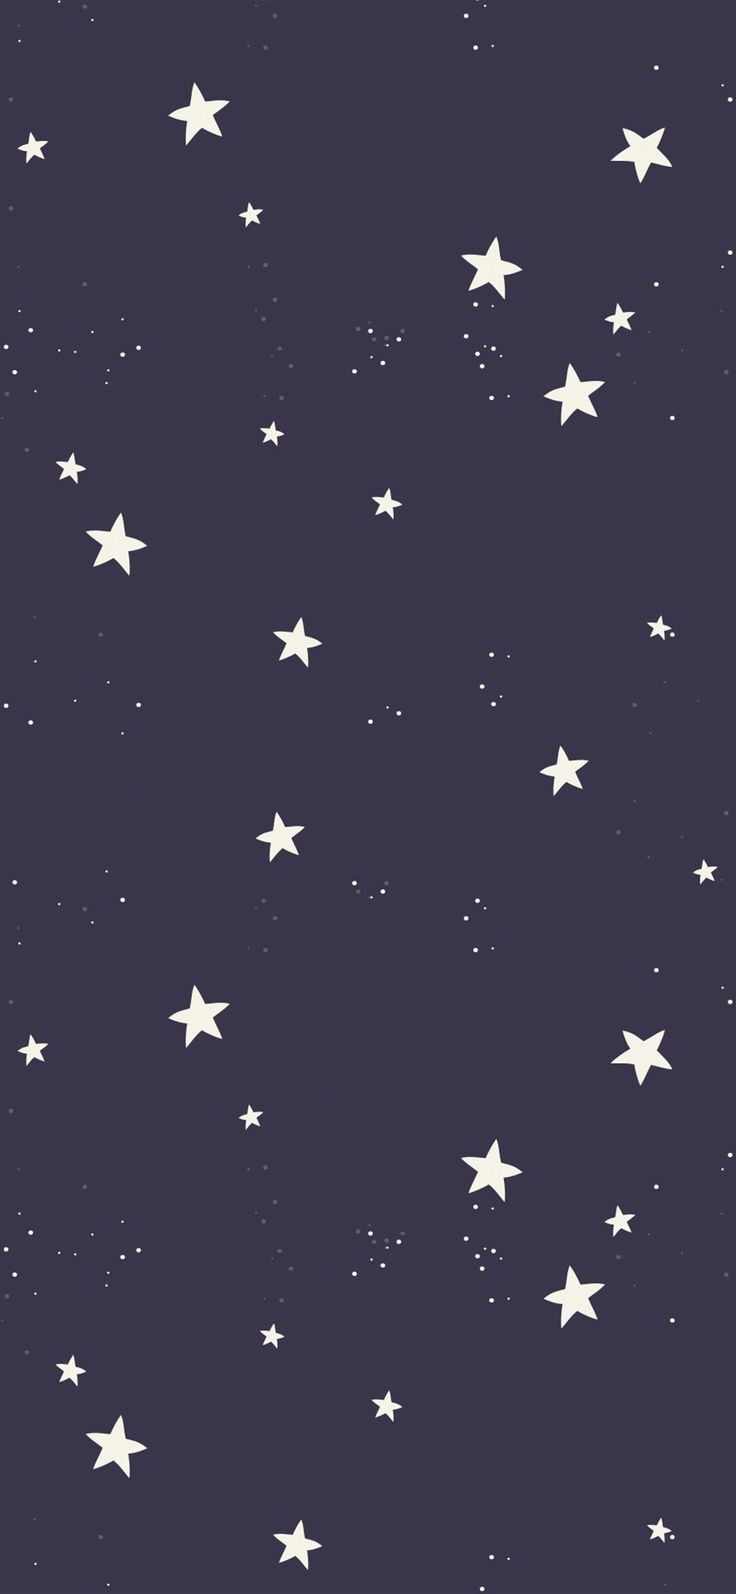 Free download the Simple Stars Pattern wallpaper , beaty your phone. #abstract #simple #art #cartoon #pattern #star #c. Wallpaper, Phone wallpaper, Star wallpaper